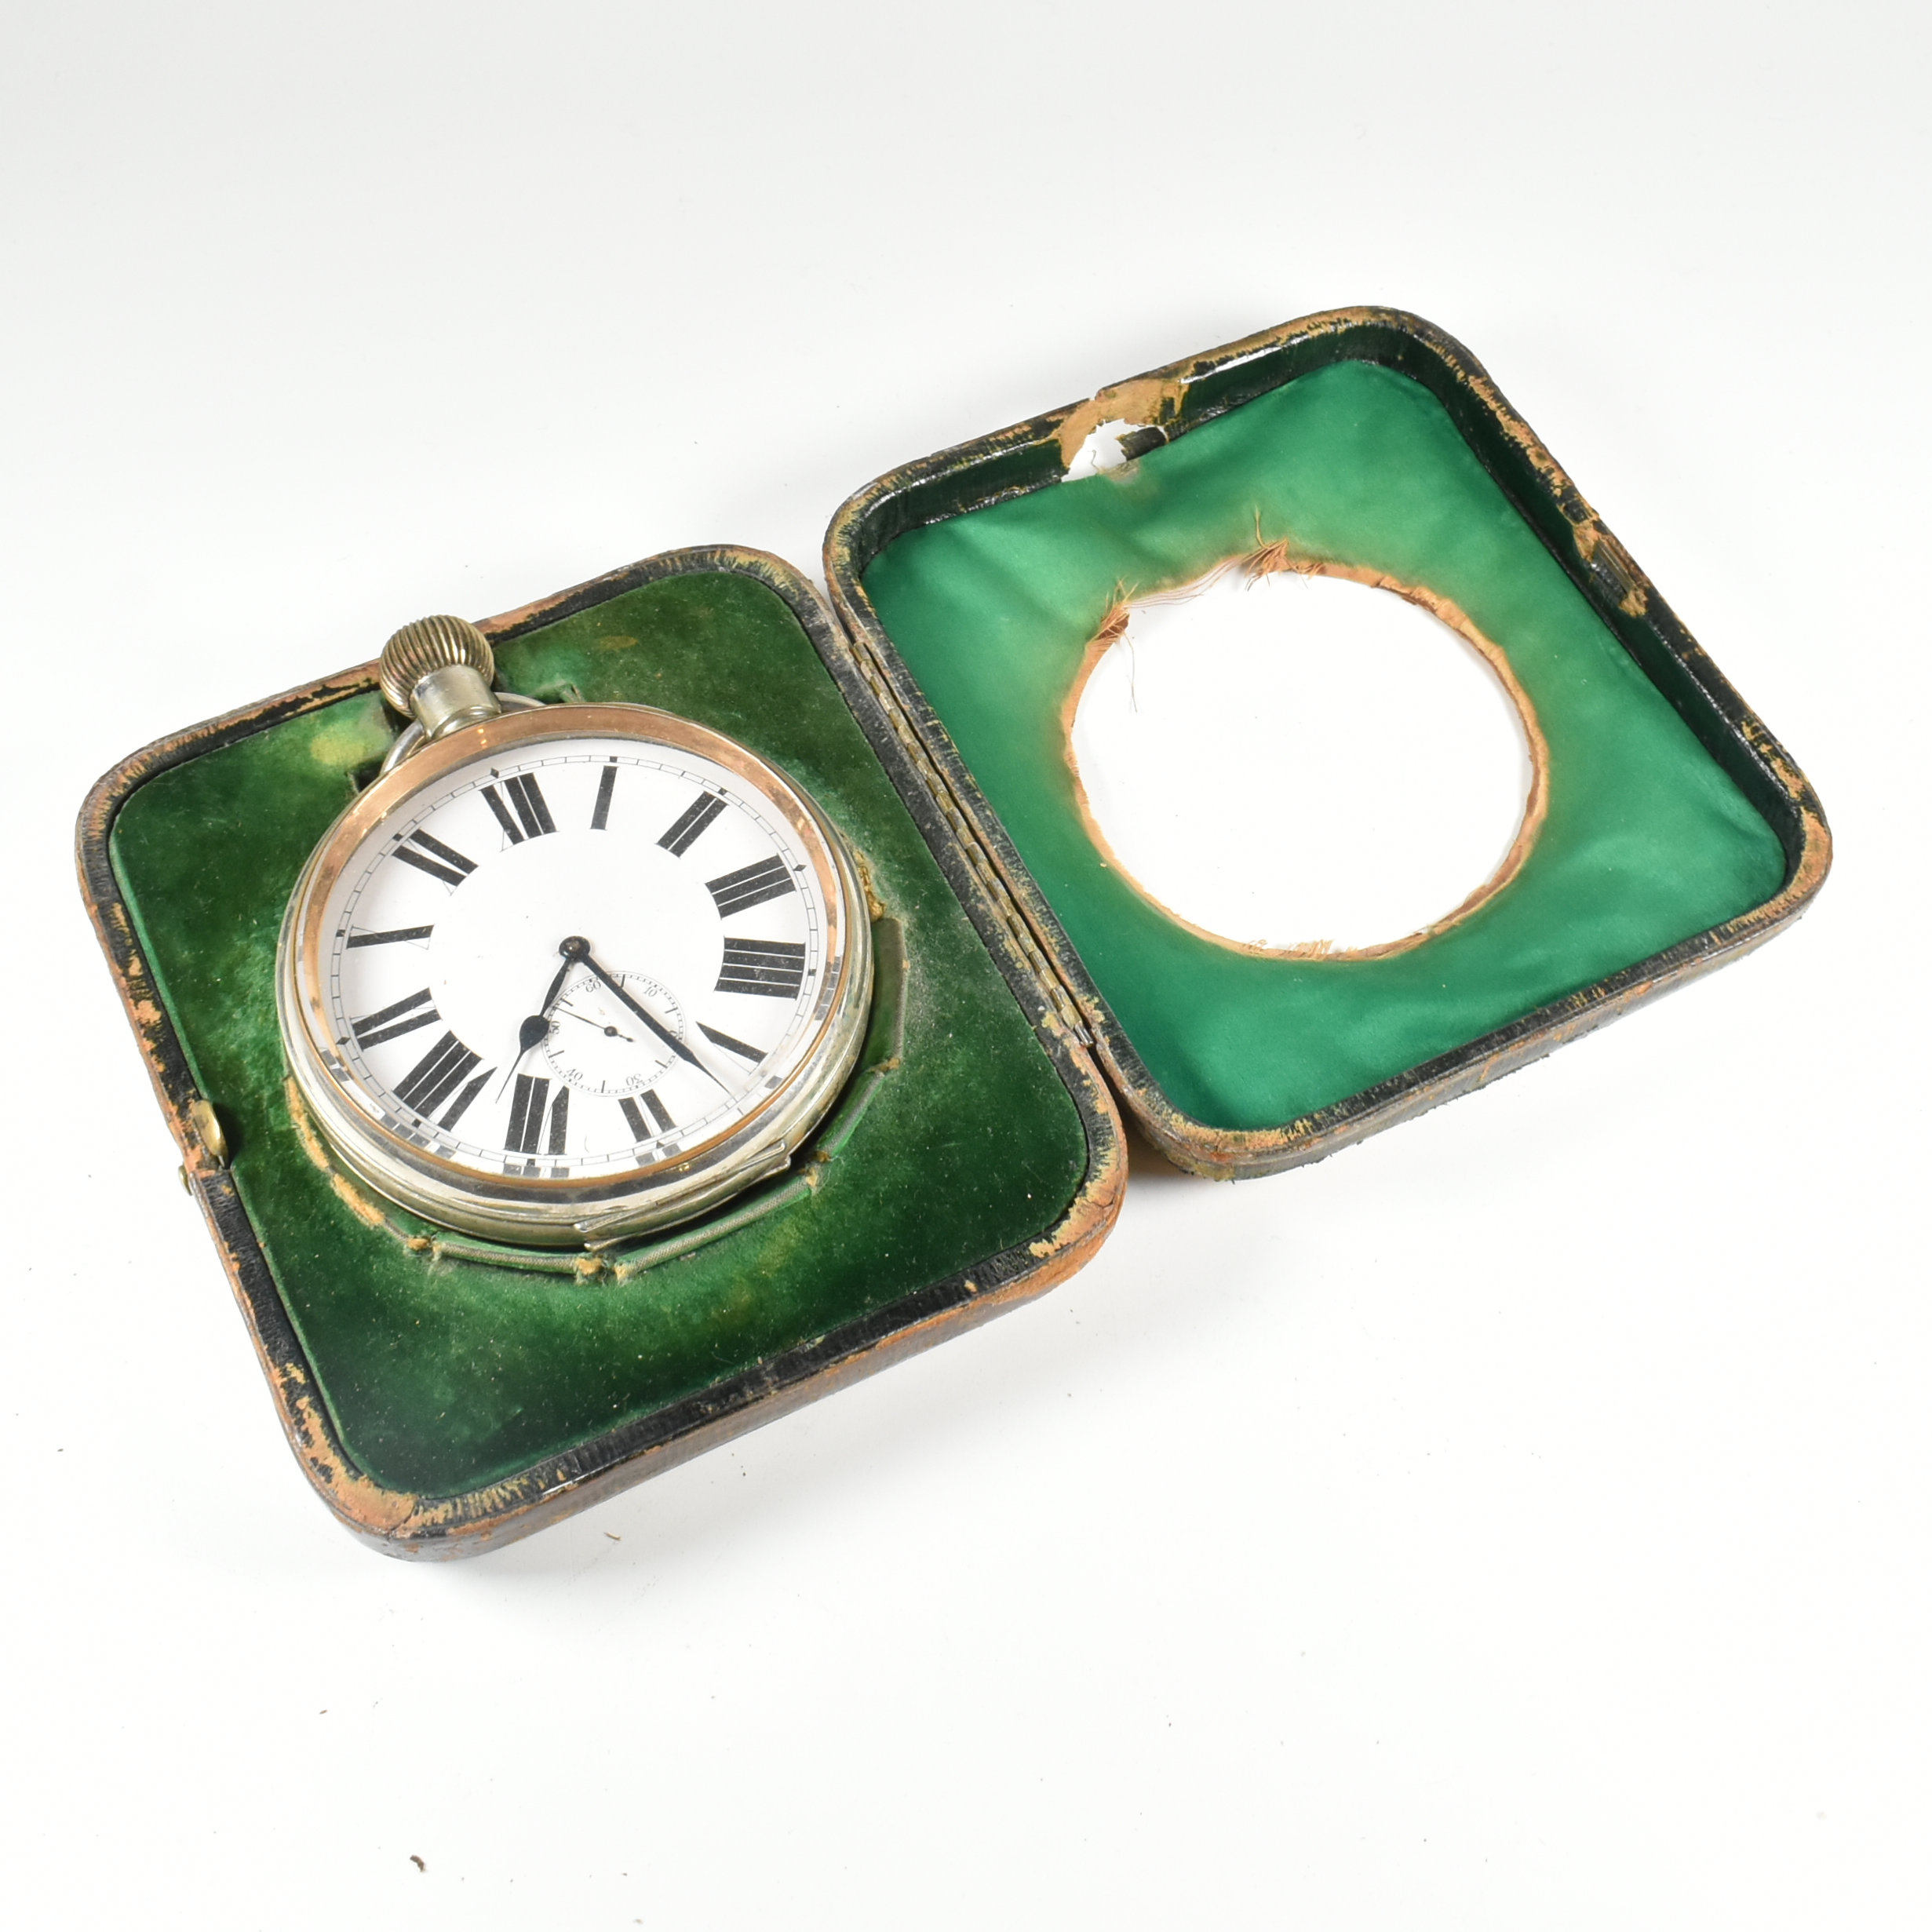 VICTORIAN HALLMARKED SILVER MOUNTED CASE & GOLIATH WATCH - Image 6 of 8